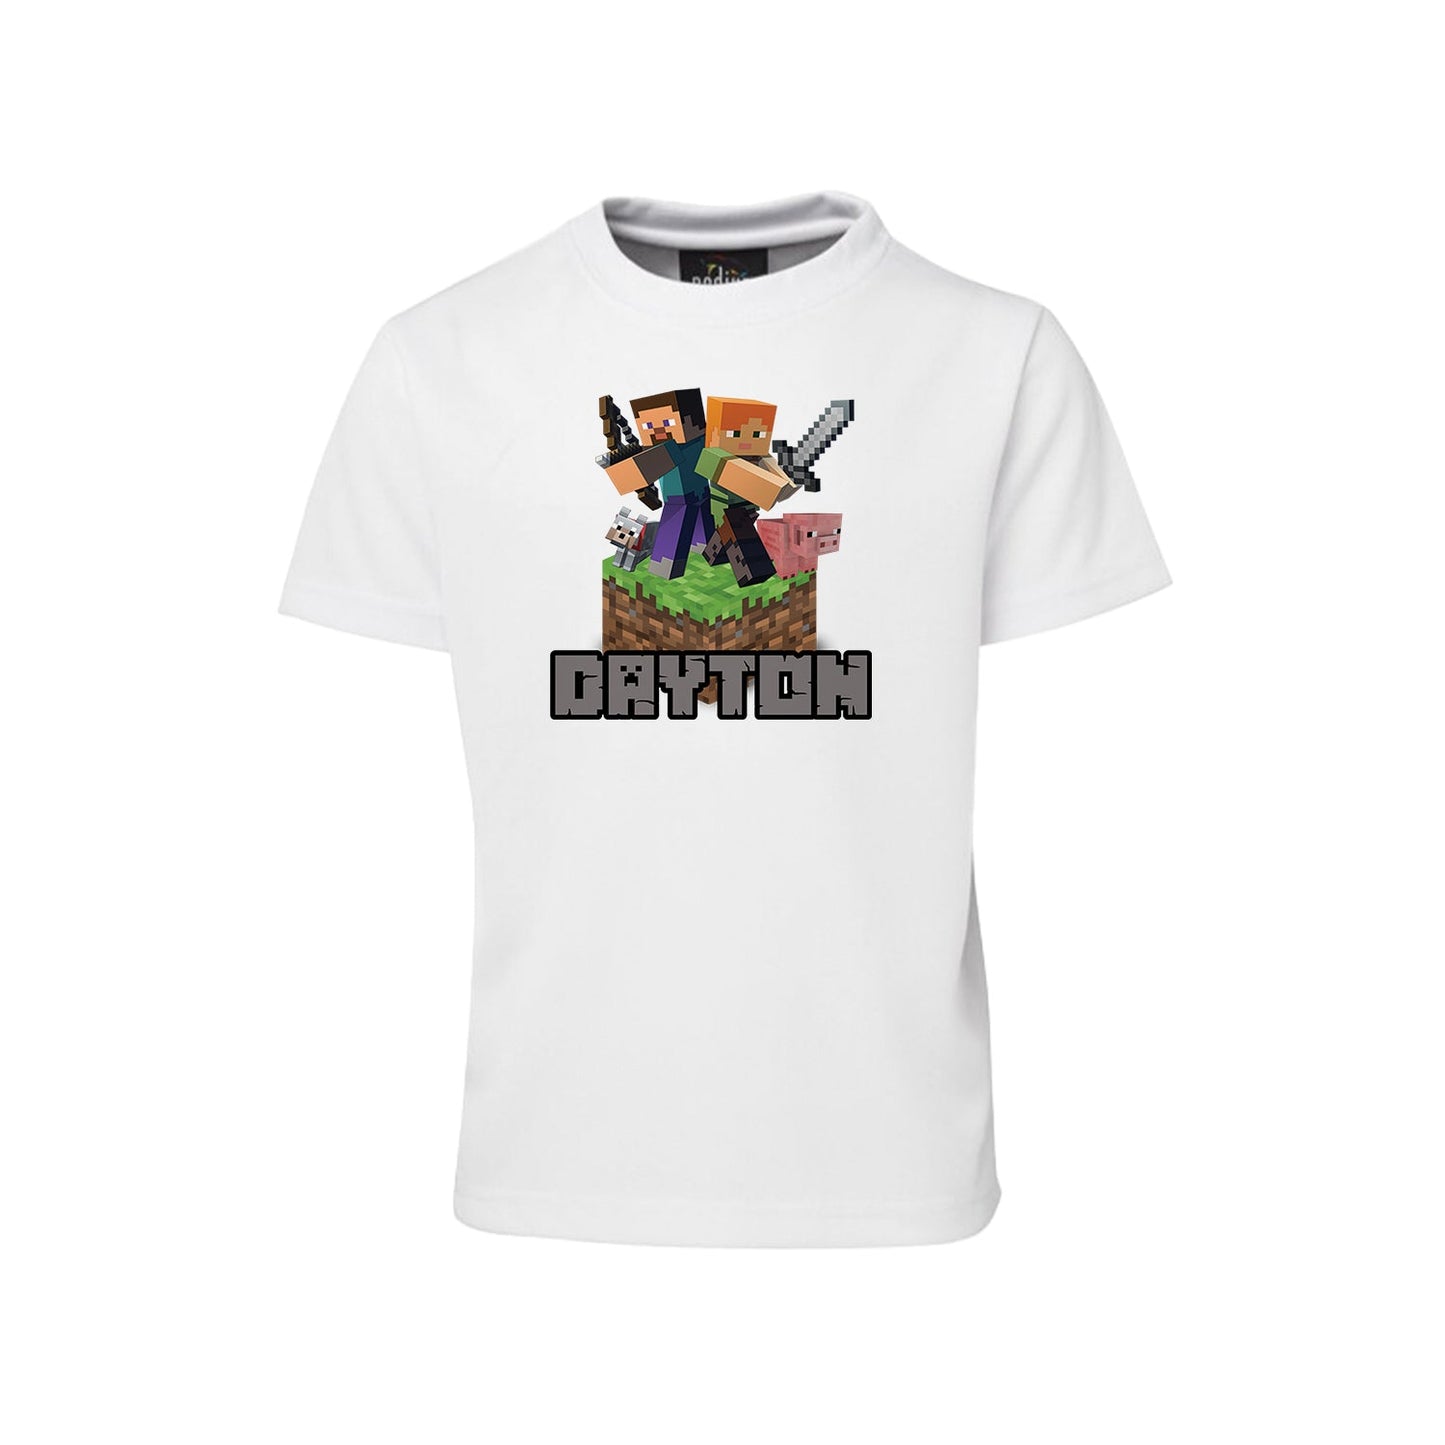 Minecraft Sublimation T-Shirt showing your Minecraft love in style